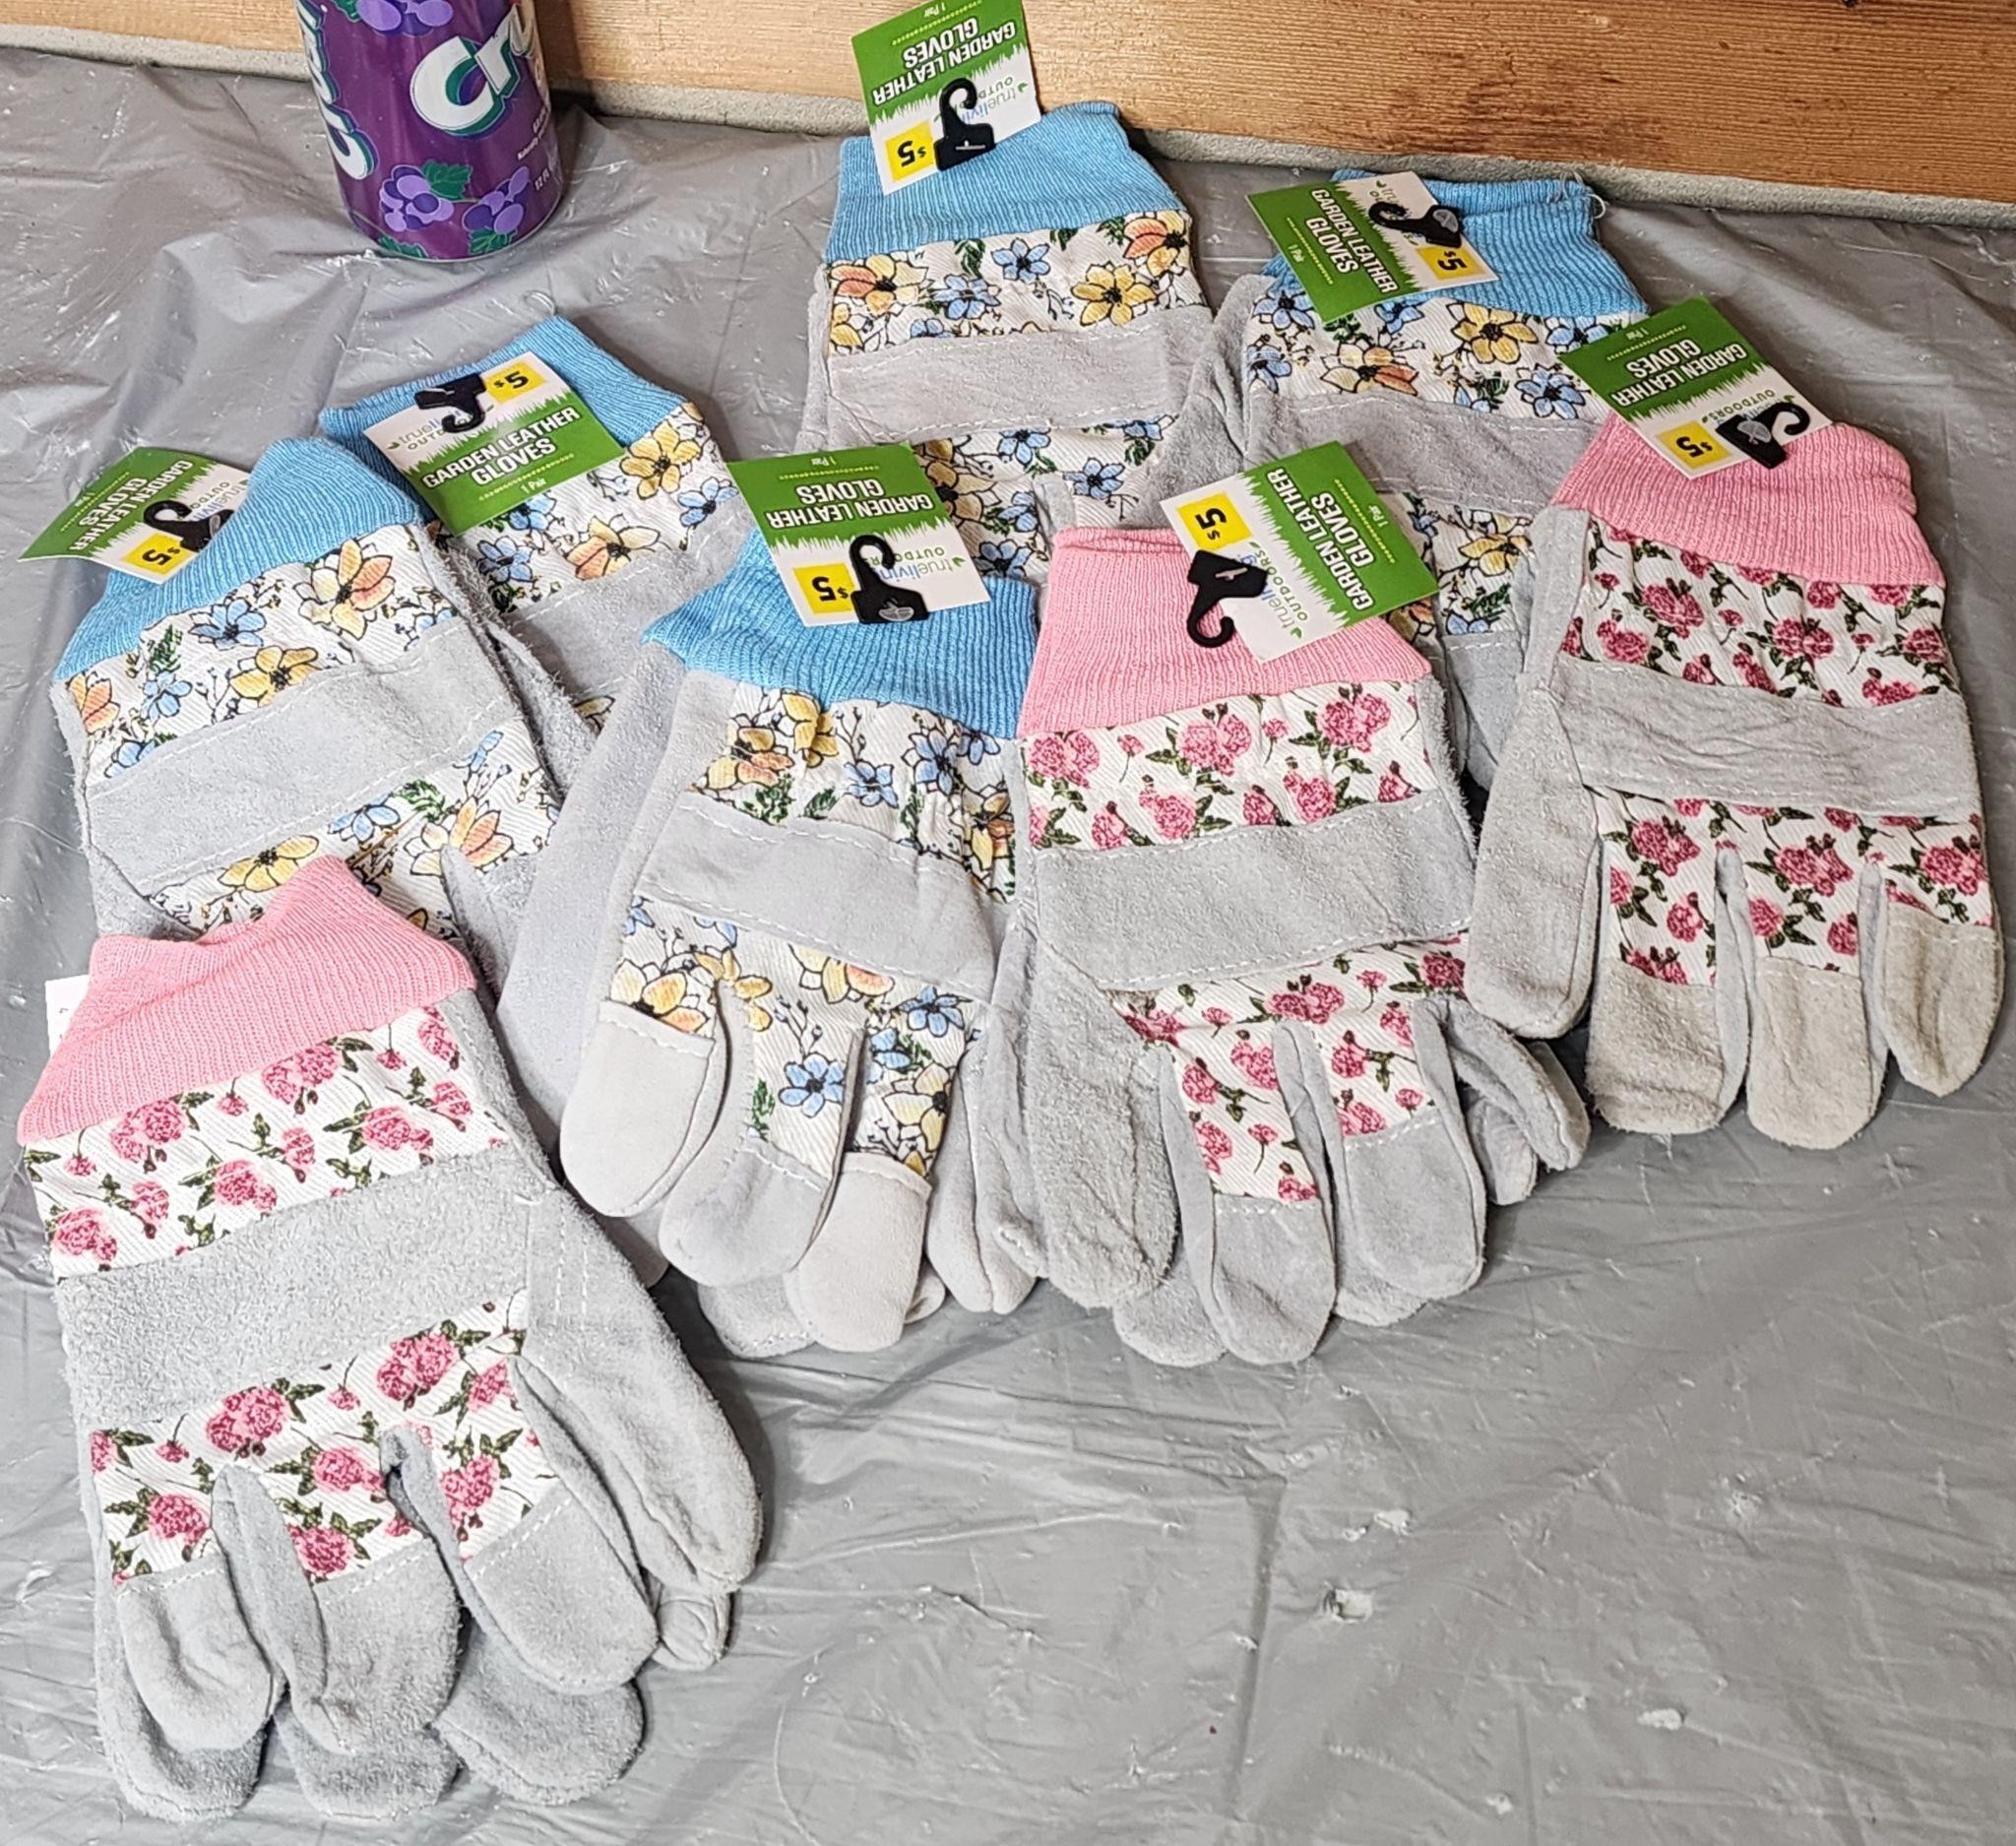 Lot of 8 pair of leather gardening gloves